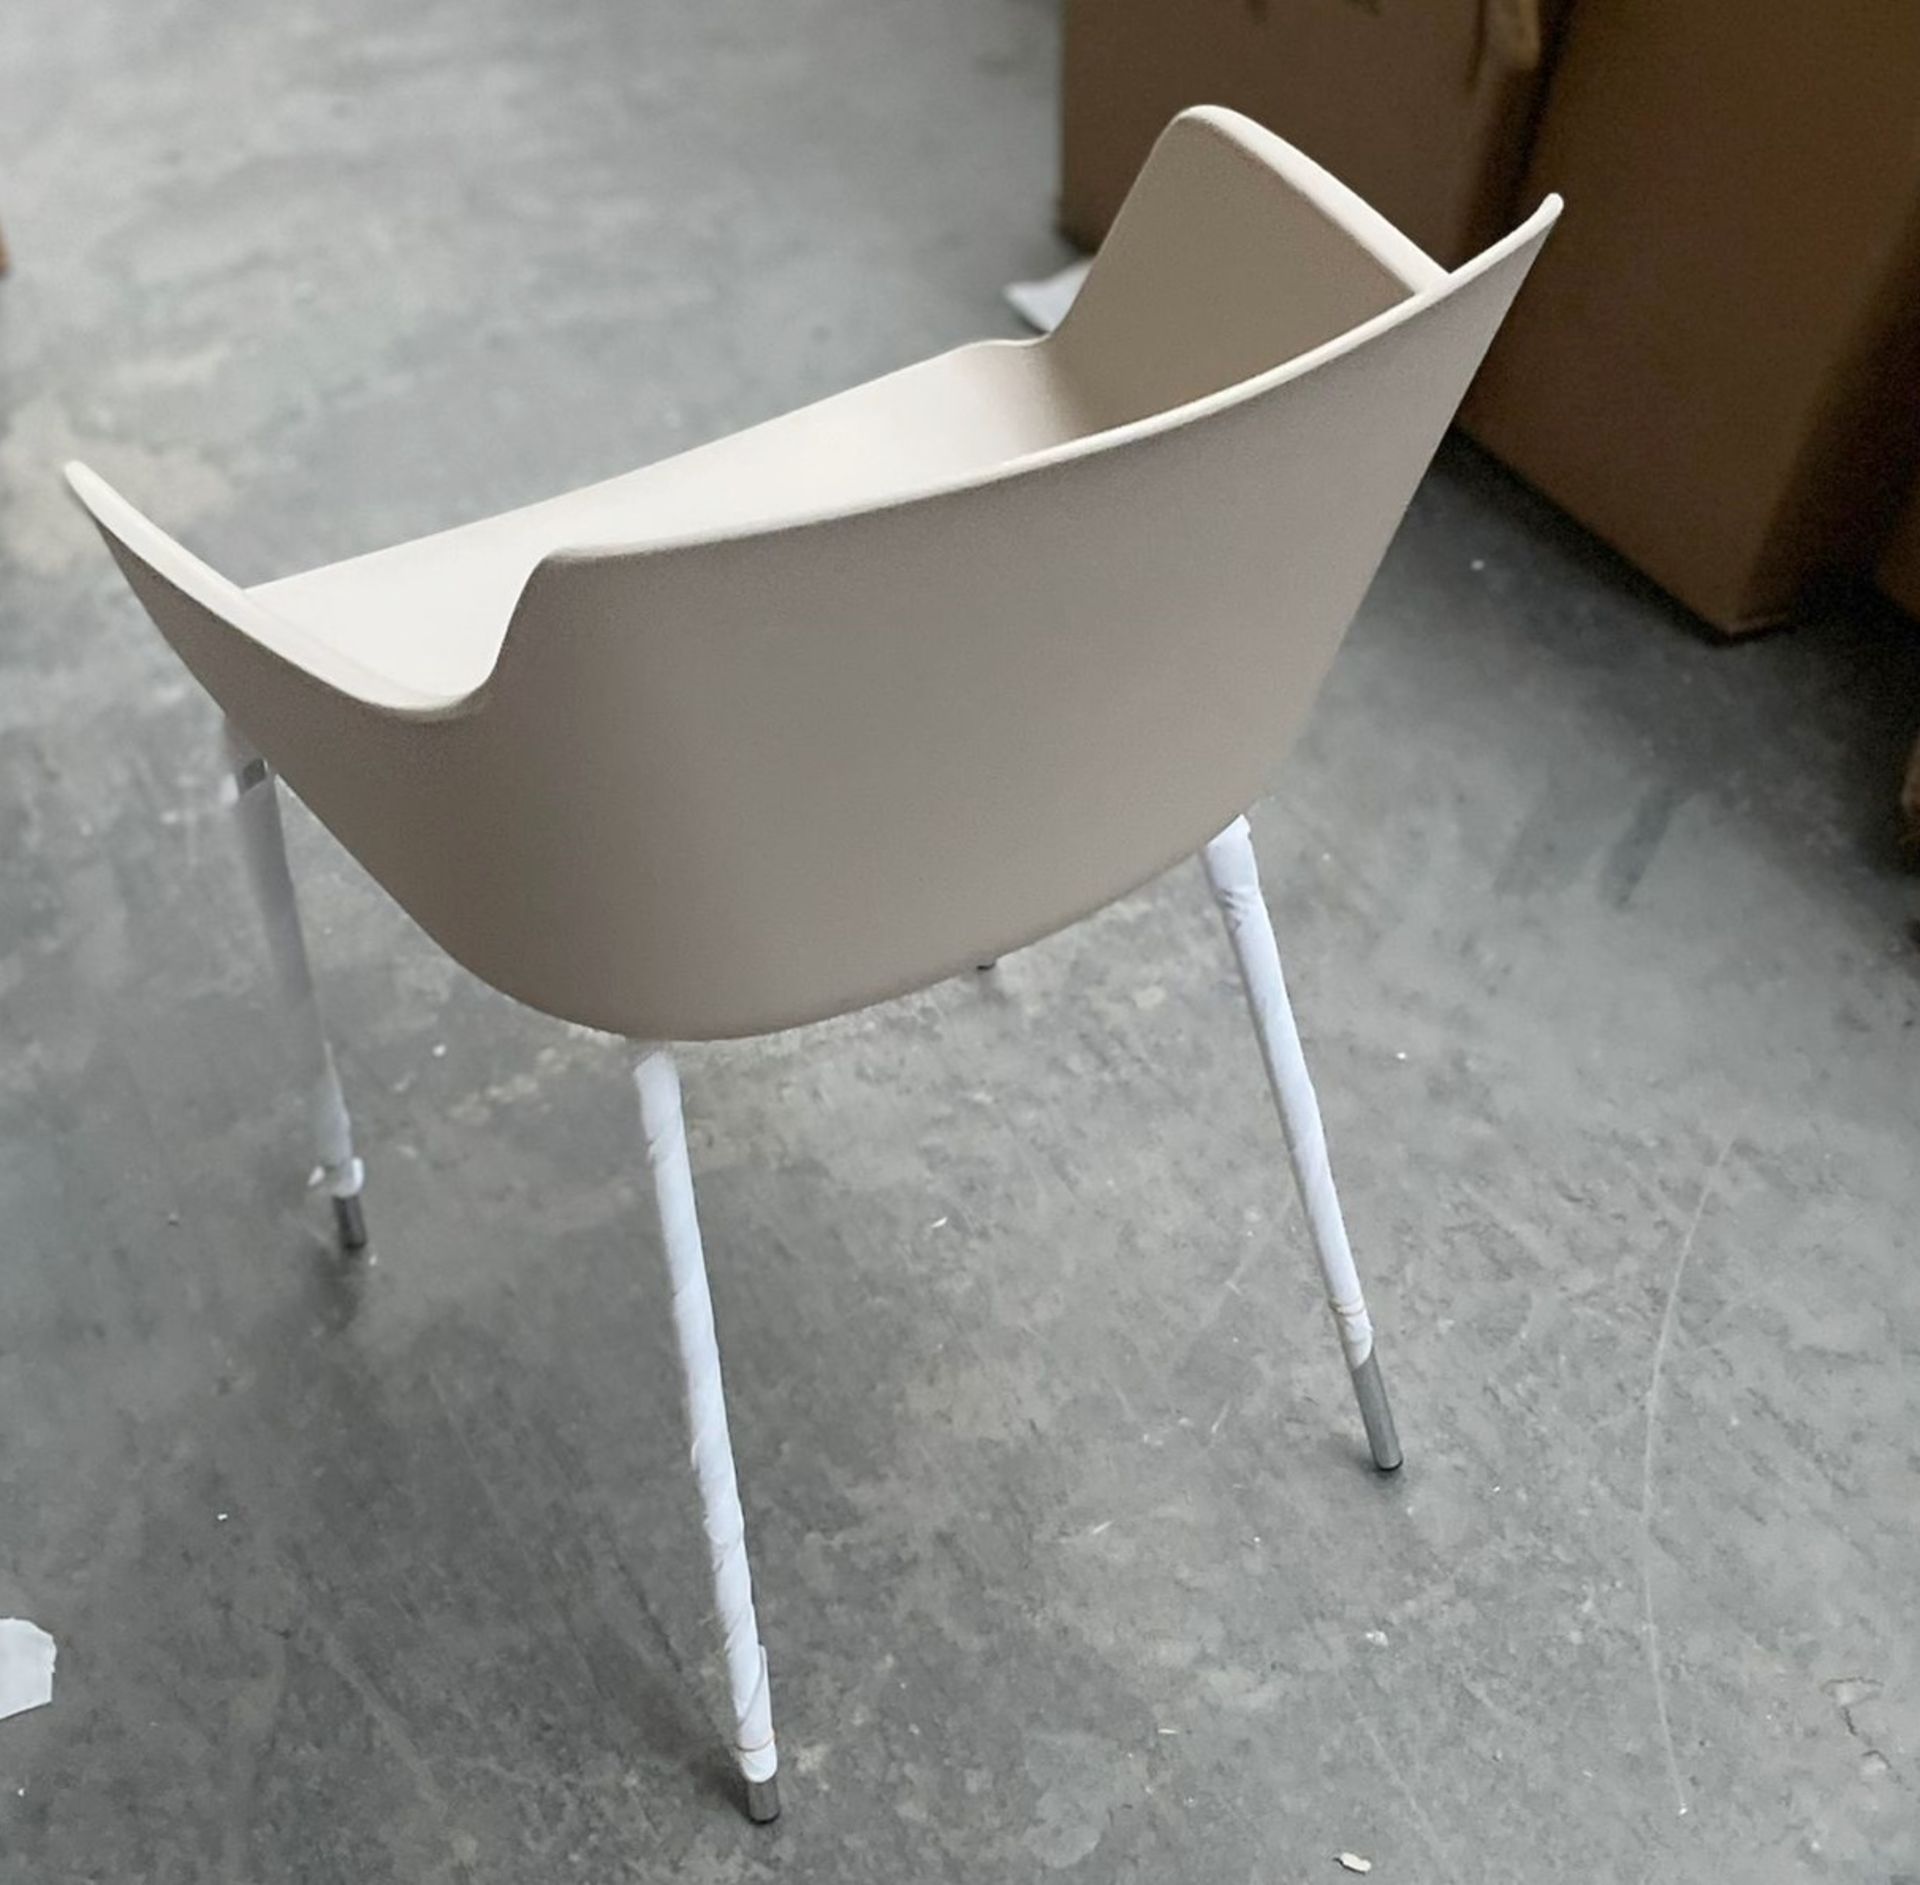 1 x Lullaby Ooland Light Brown Chair With Chrome Base - Dimensions: 57(h) x 52(w) x 52(d) cm - Brand - Image 5 of 5